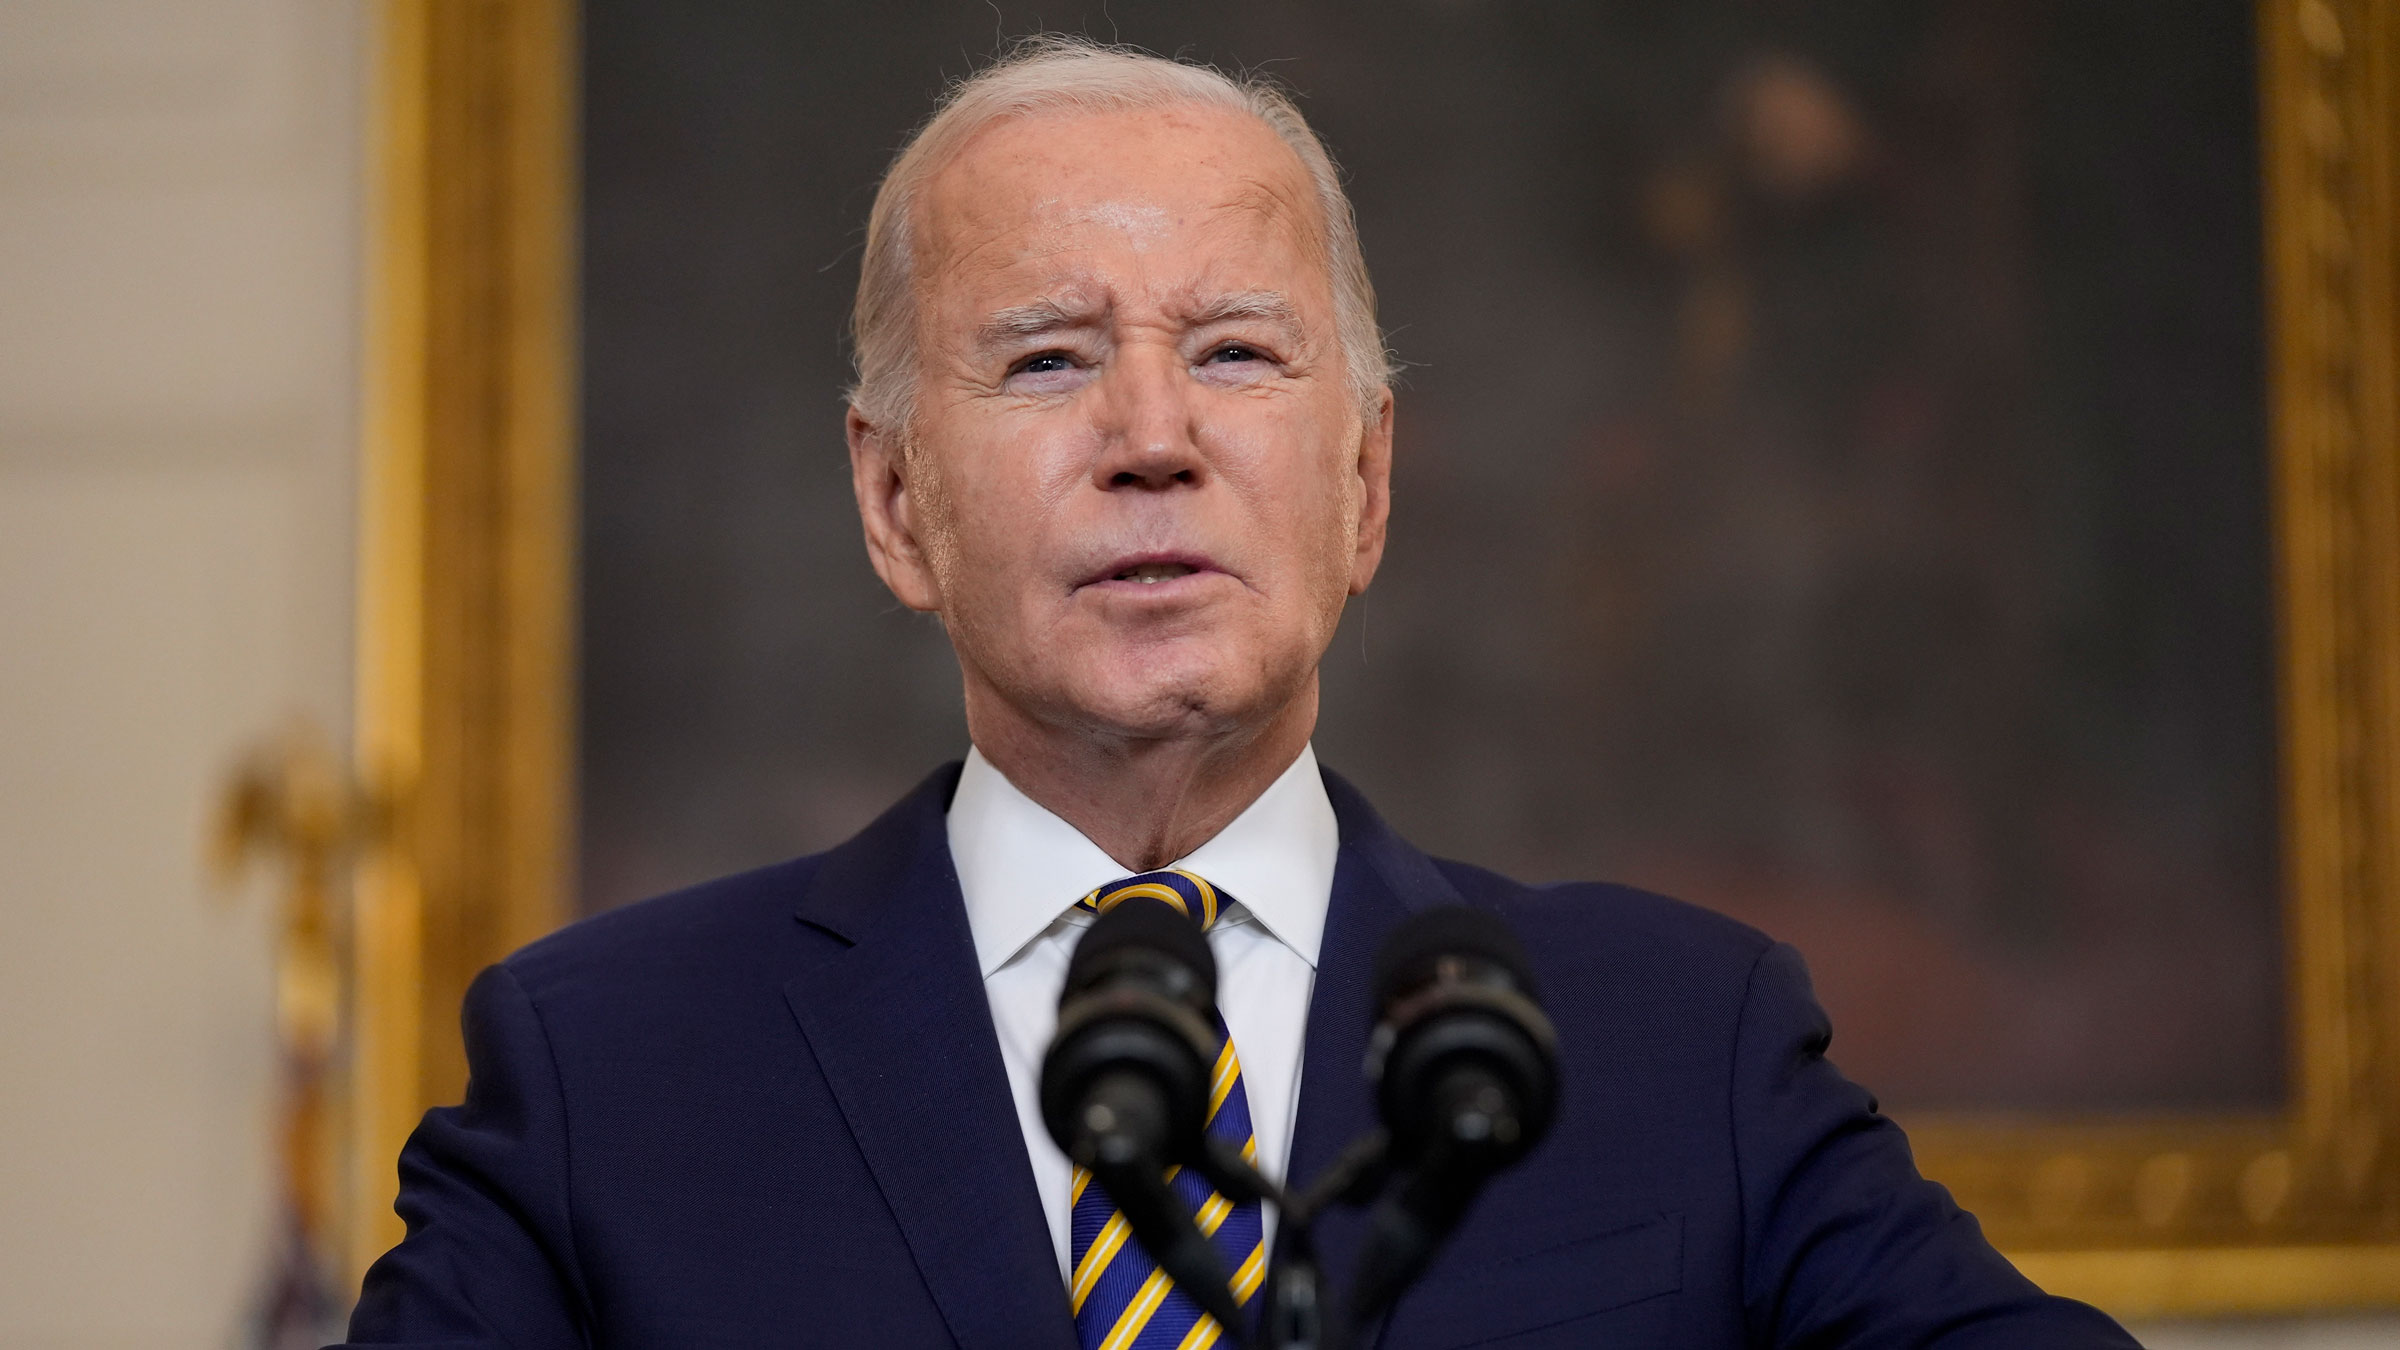 25) Biden previews campaign talking points by focusing on Trump for sinking  border bill